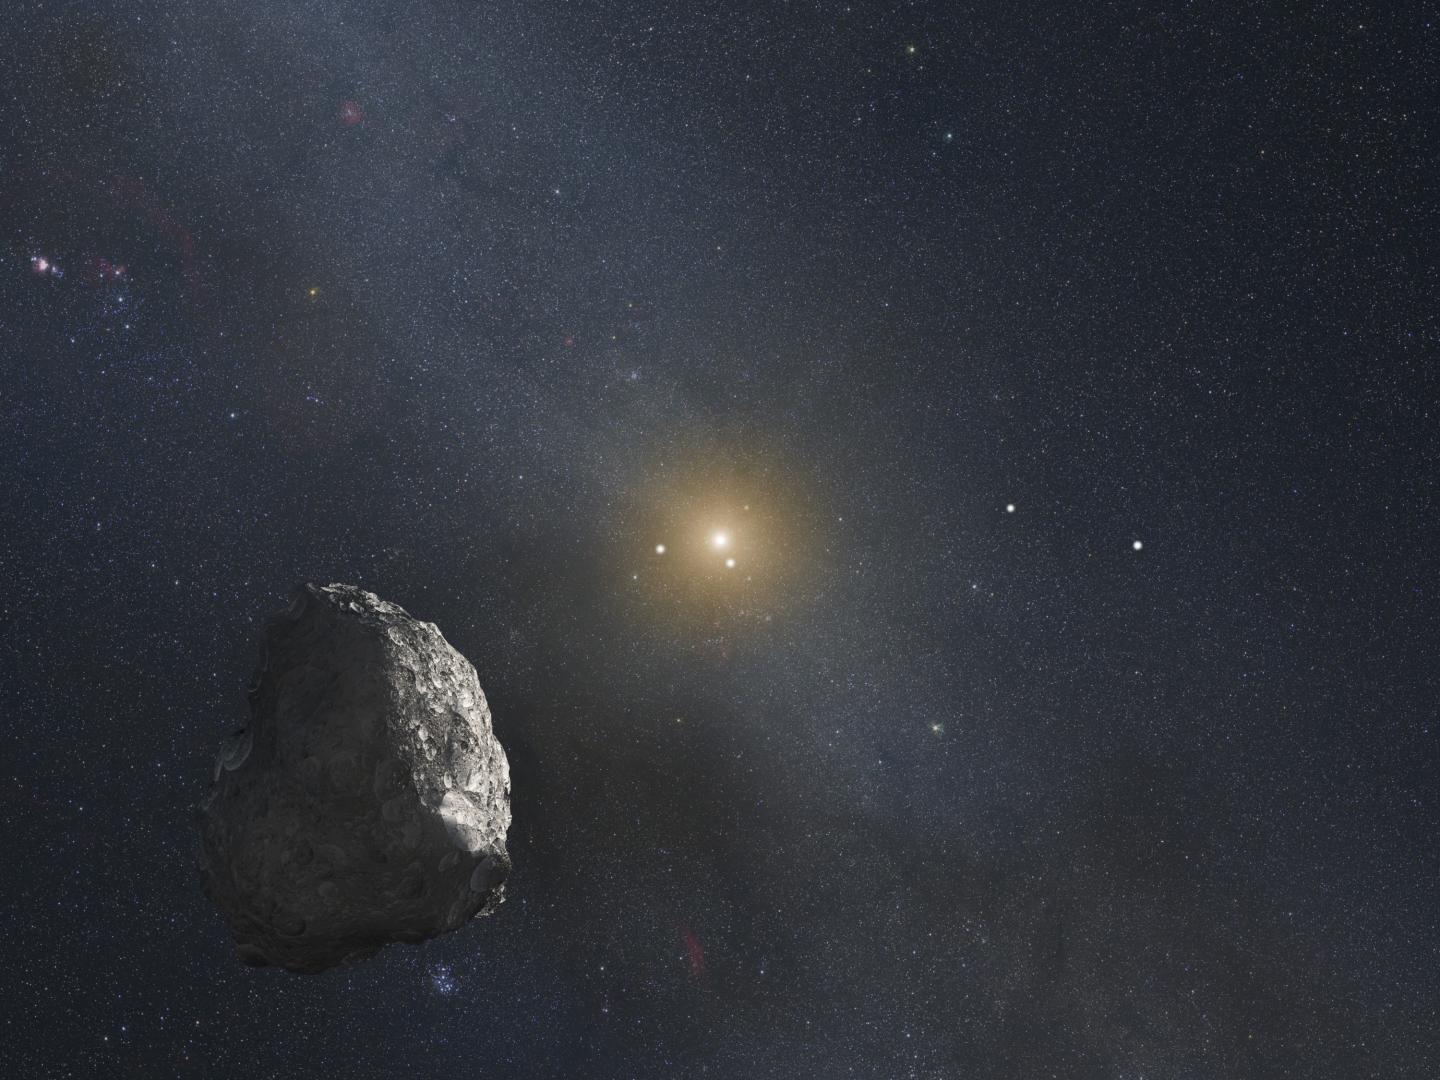 Illustration of Kuiper Belt Object with distant Sun in background